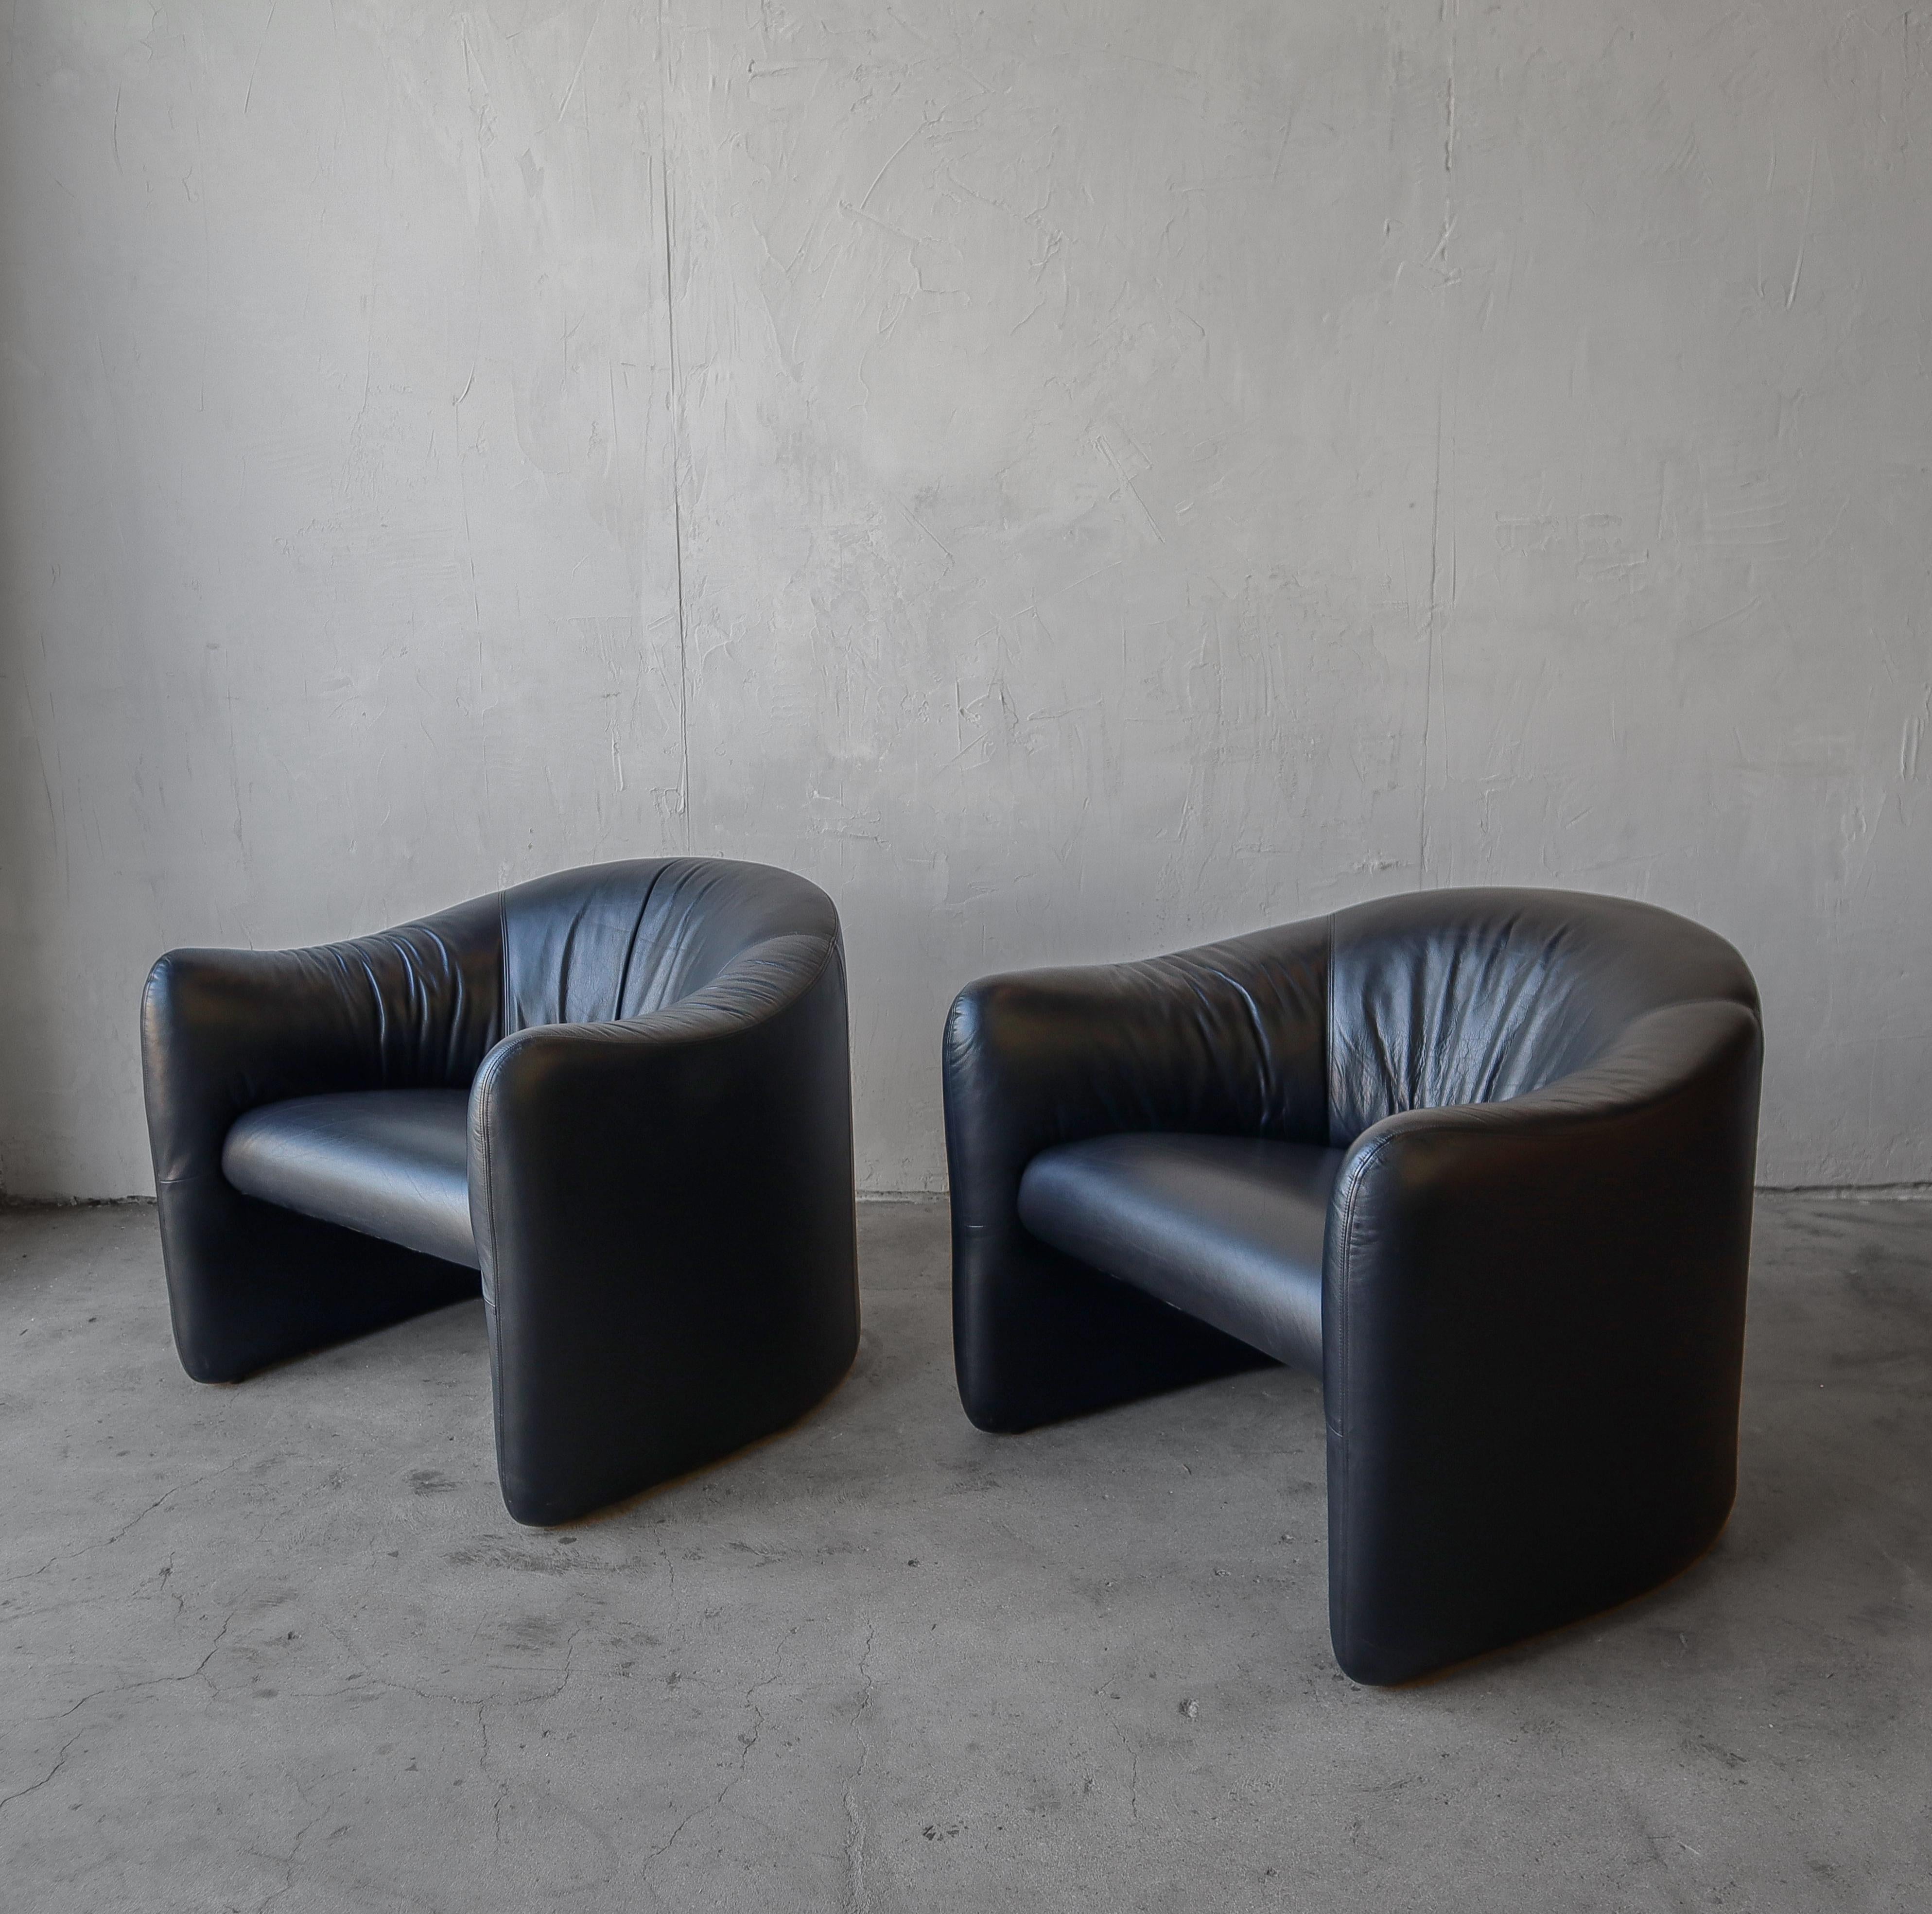 Nice pair of all original Post Modern lounge chairs by Jules Heumann for Metropolitan Furniture. 

Original black leather is in great condition showing age appropriate patina but no damage or significant wear. No odors or stains. Can be used as